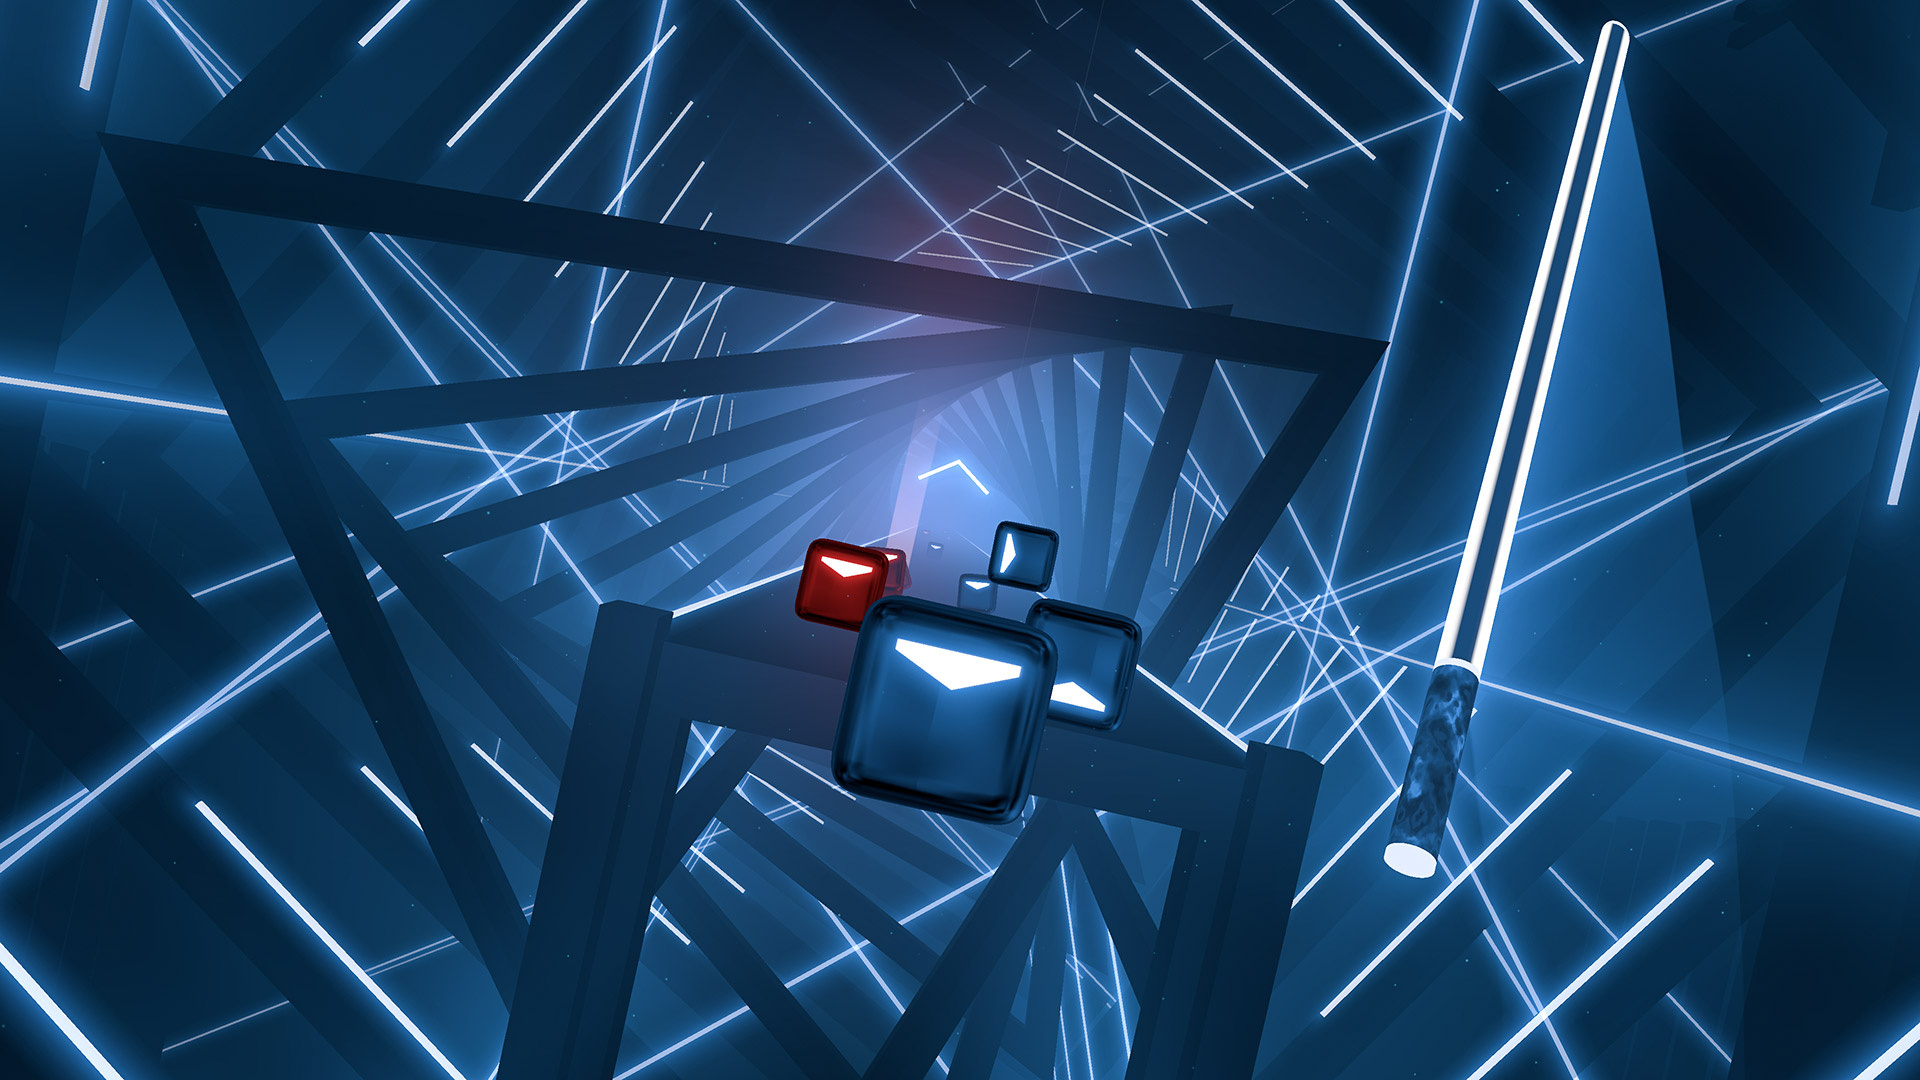 is beat saber worth it on ps4